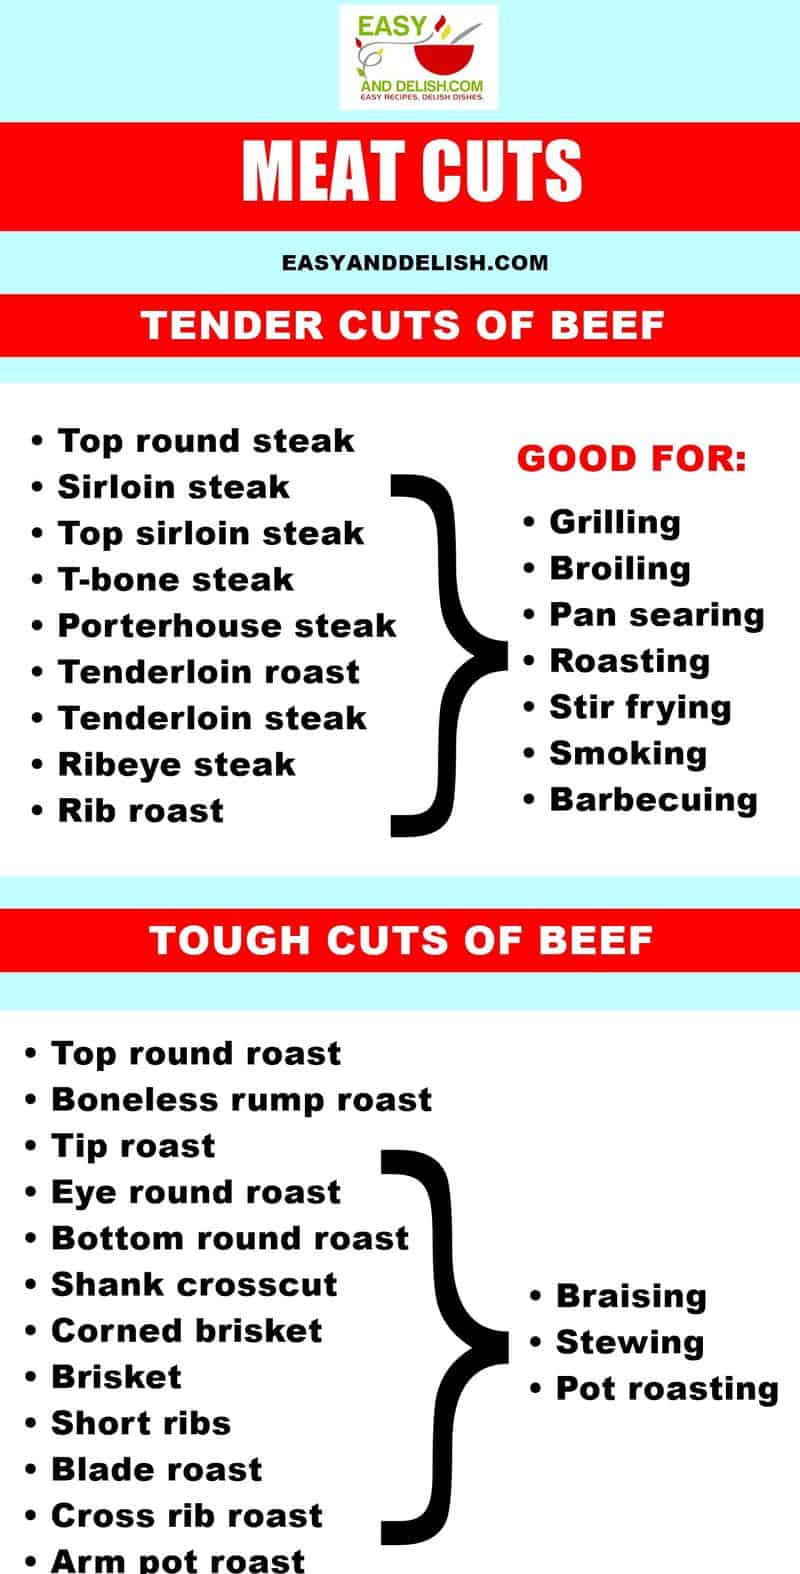 Beef cuts chart for tender and tough cuts and best cooking methods for them